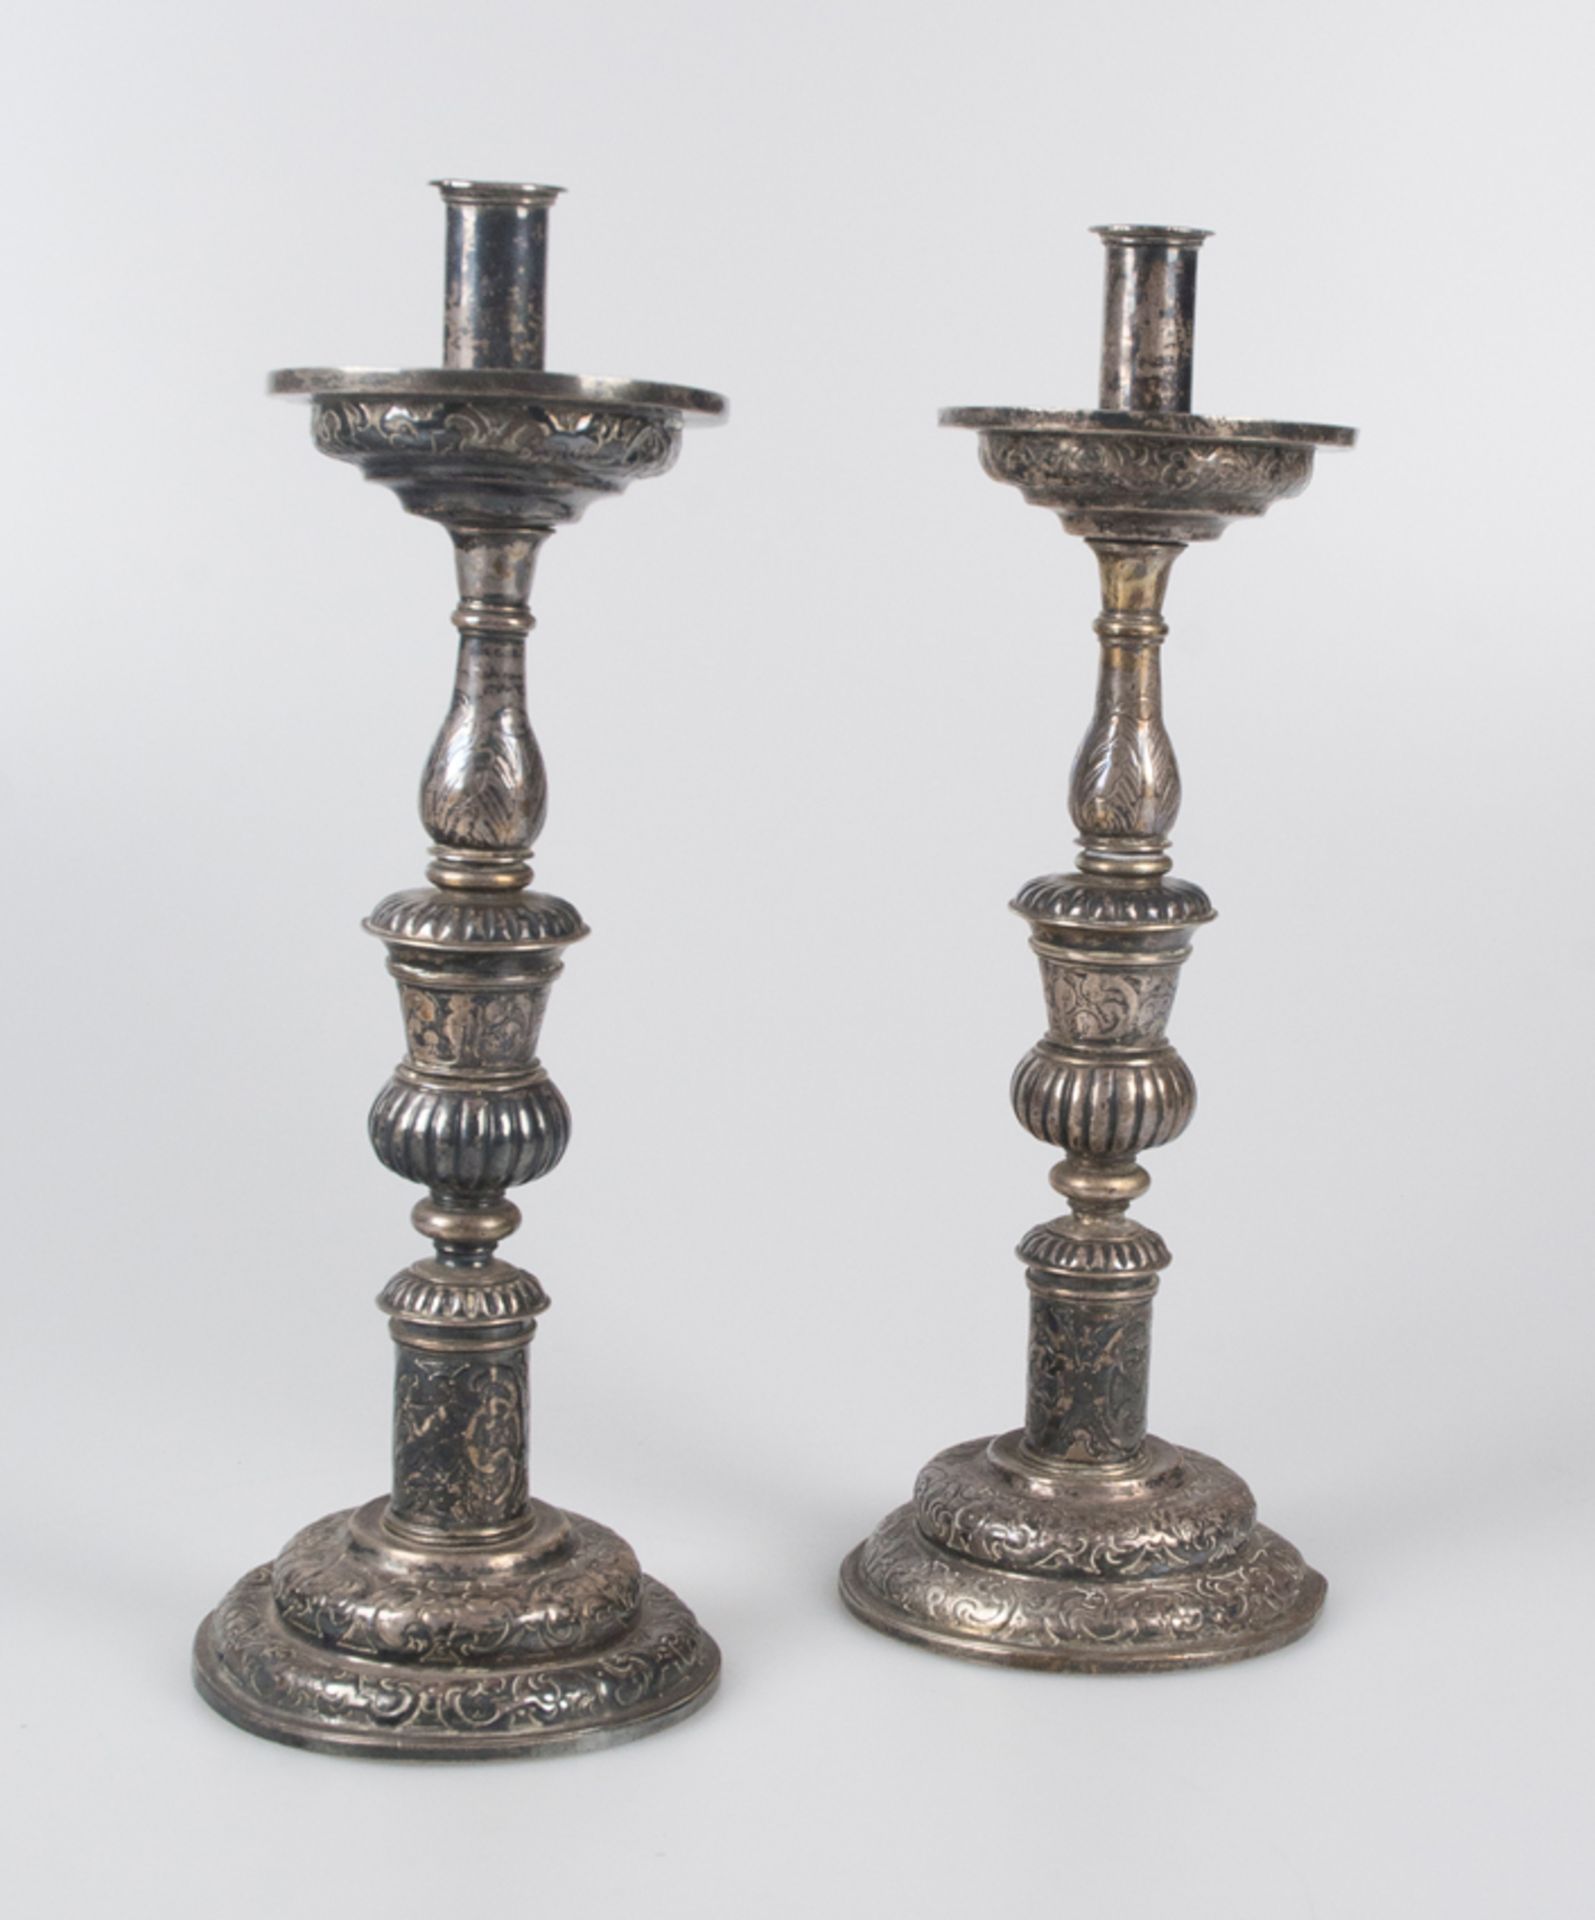 Pair of embossed and chased Spanish silver candlesticks. 16th 17th century.